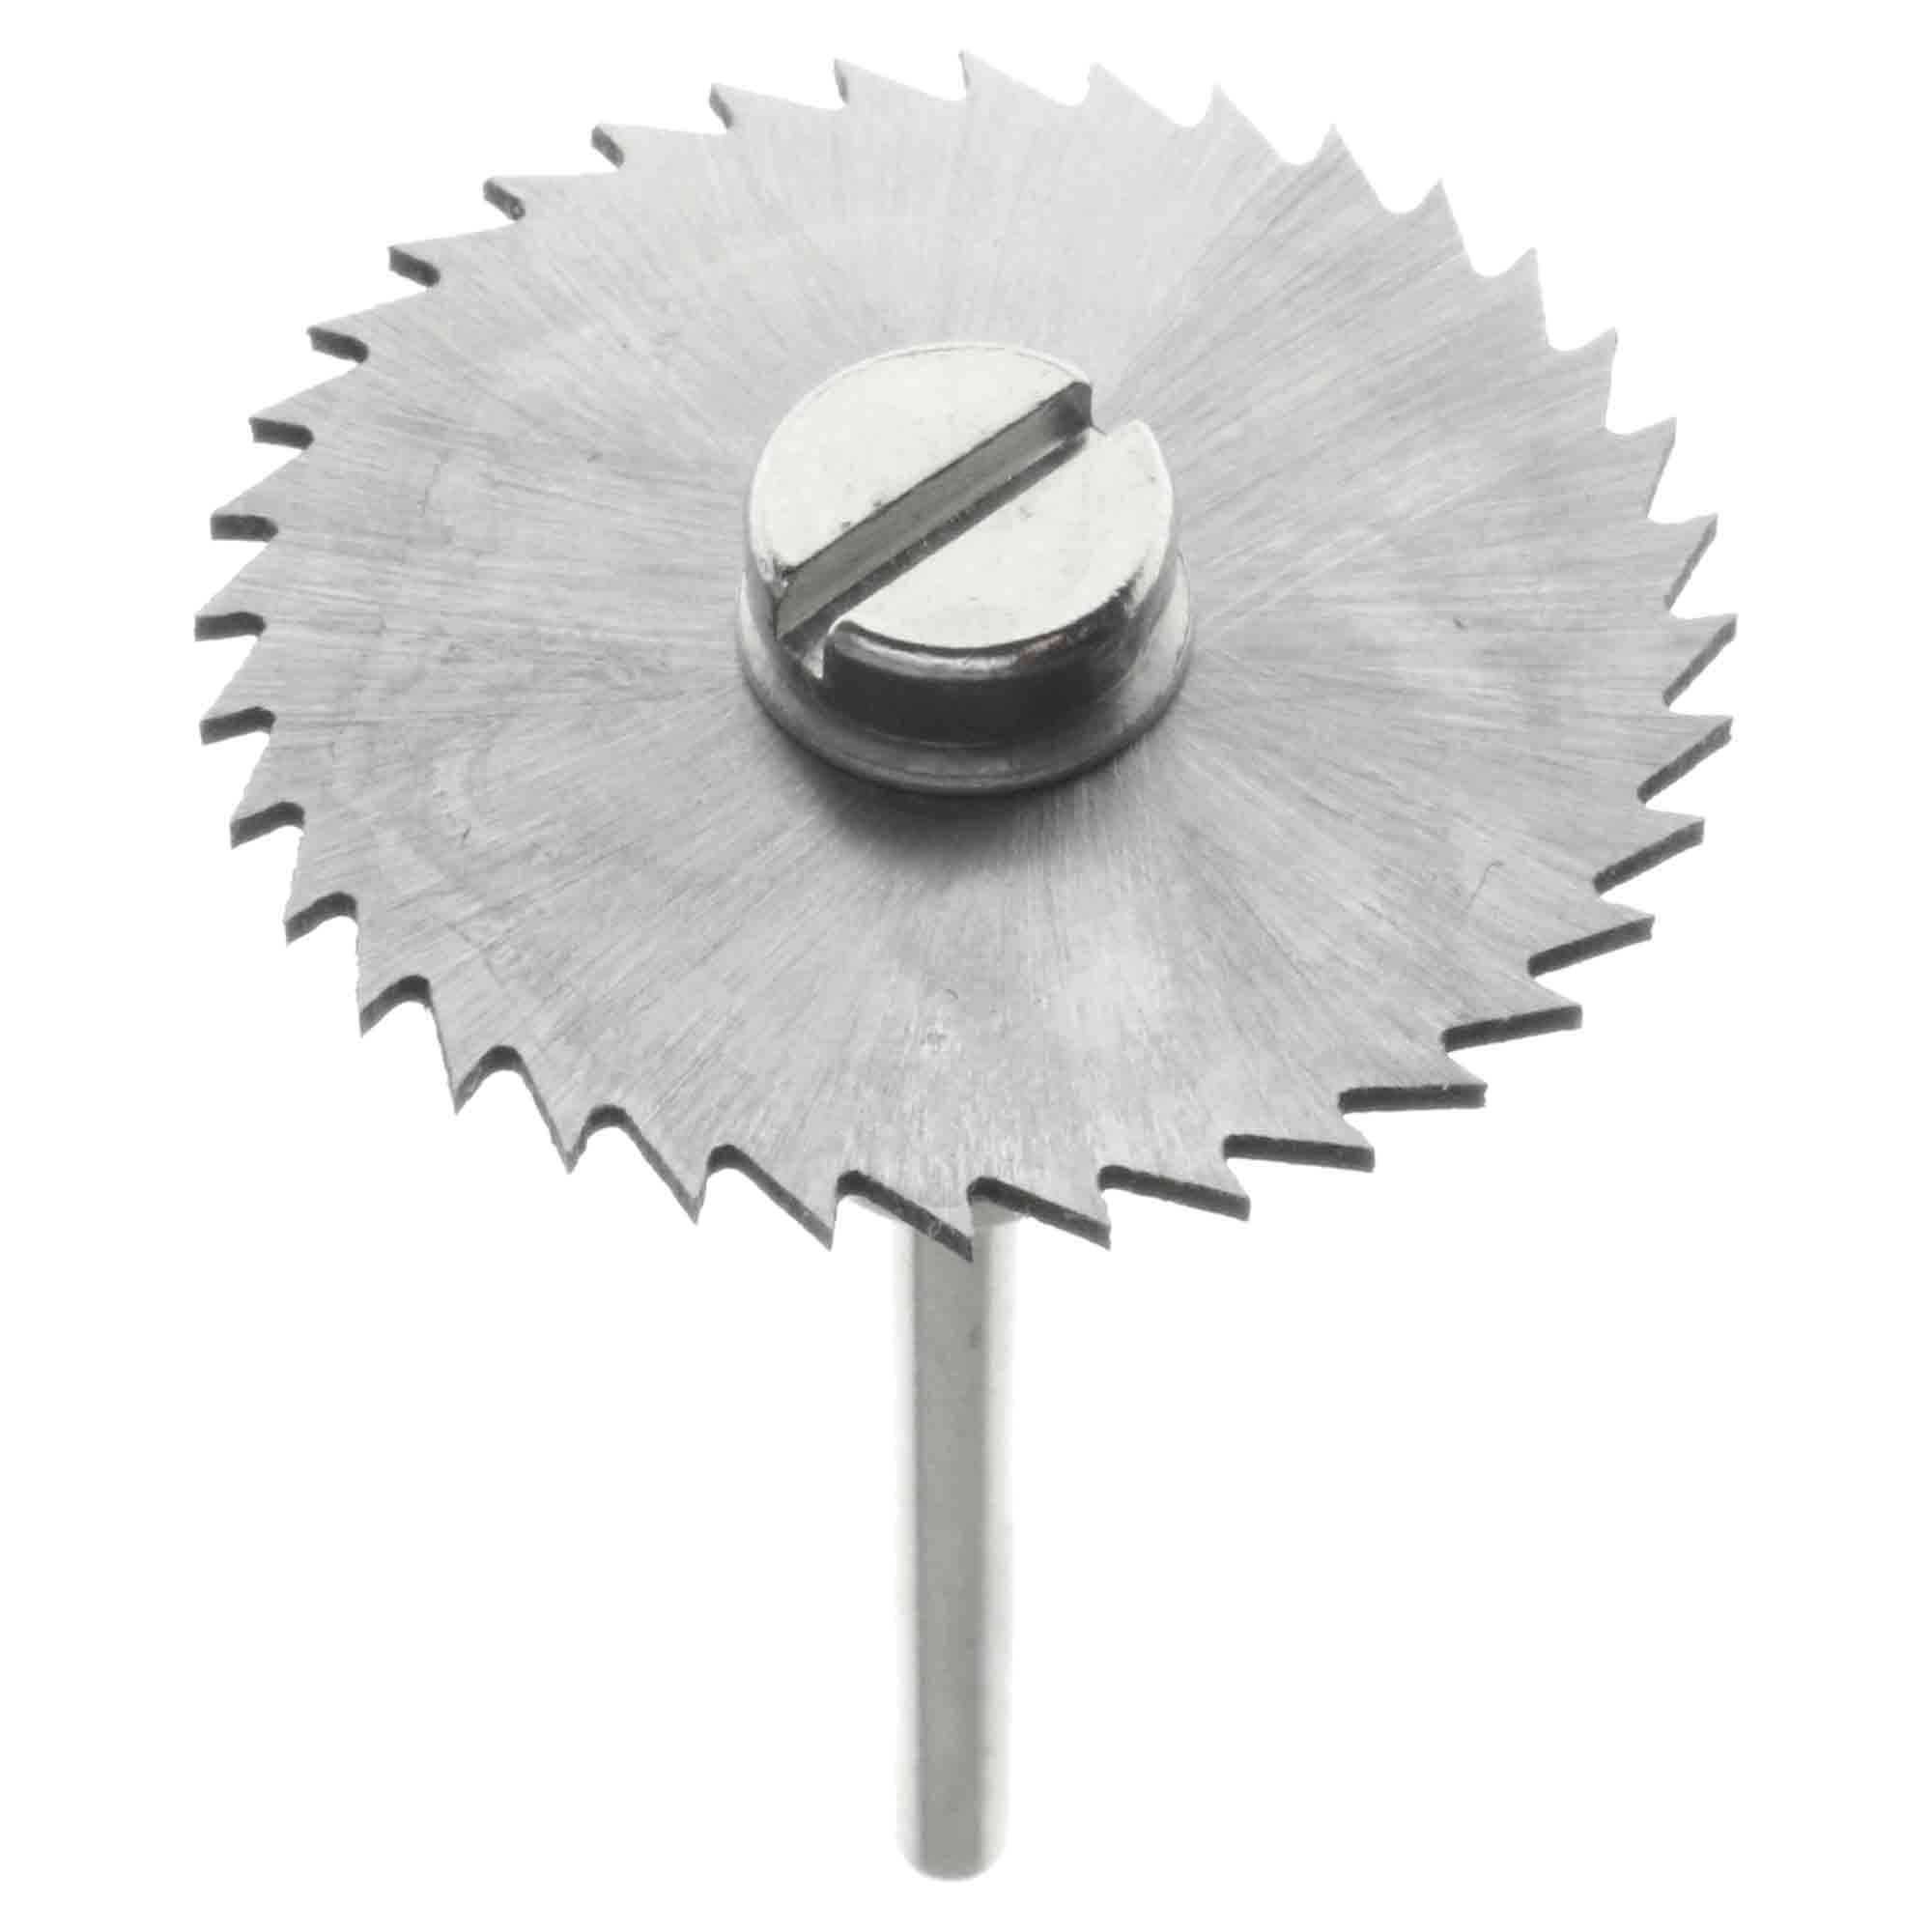 31.8mm - 1.25 inch Coarse HSS Saw Blade and Mandrel, 1/8 inch shank